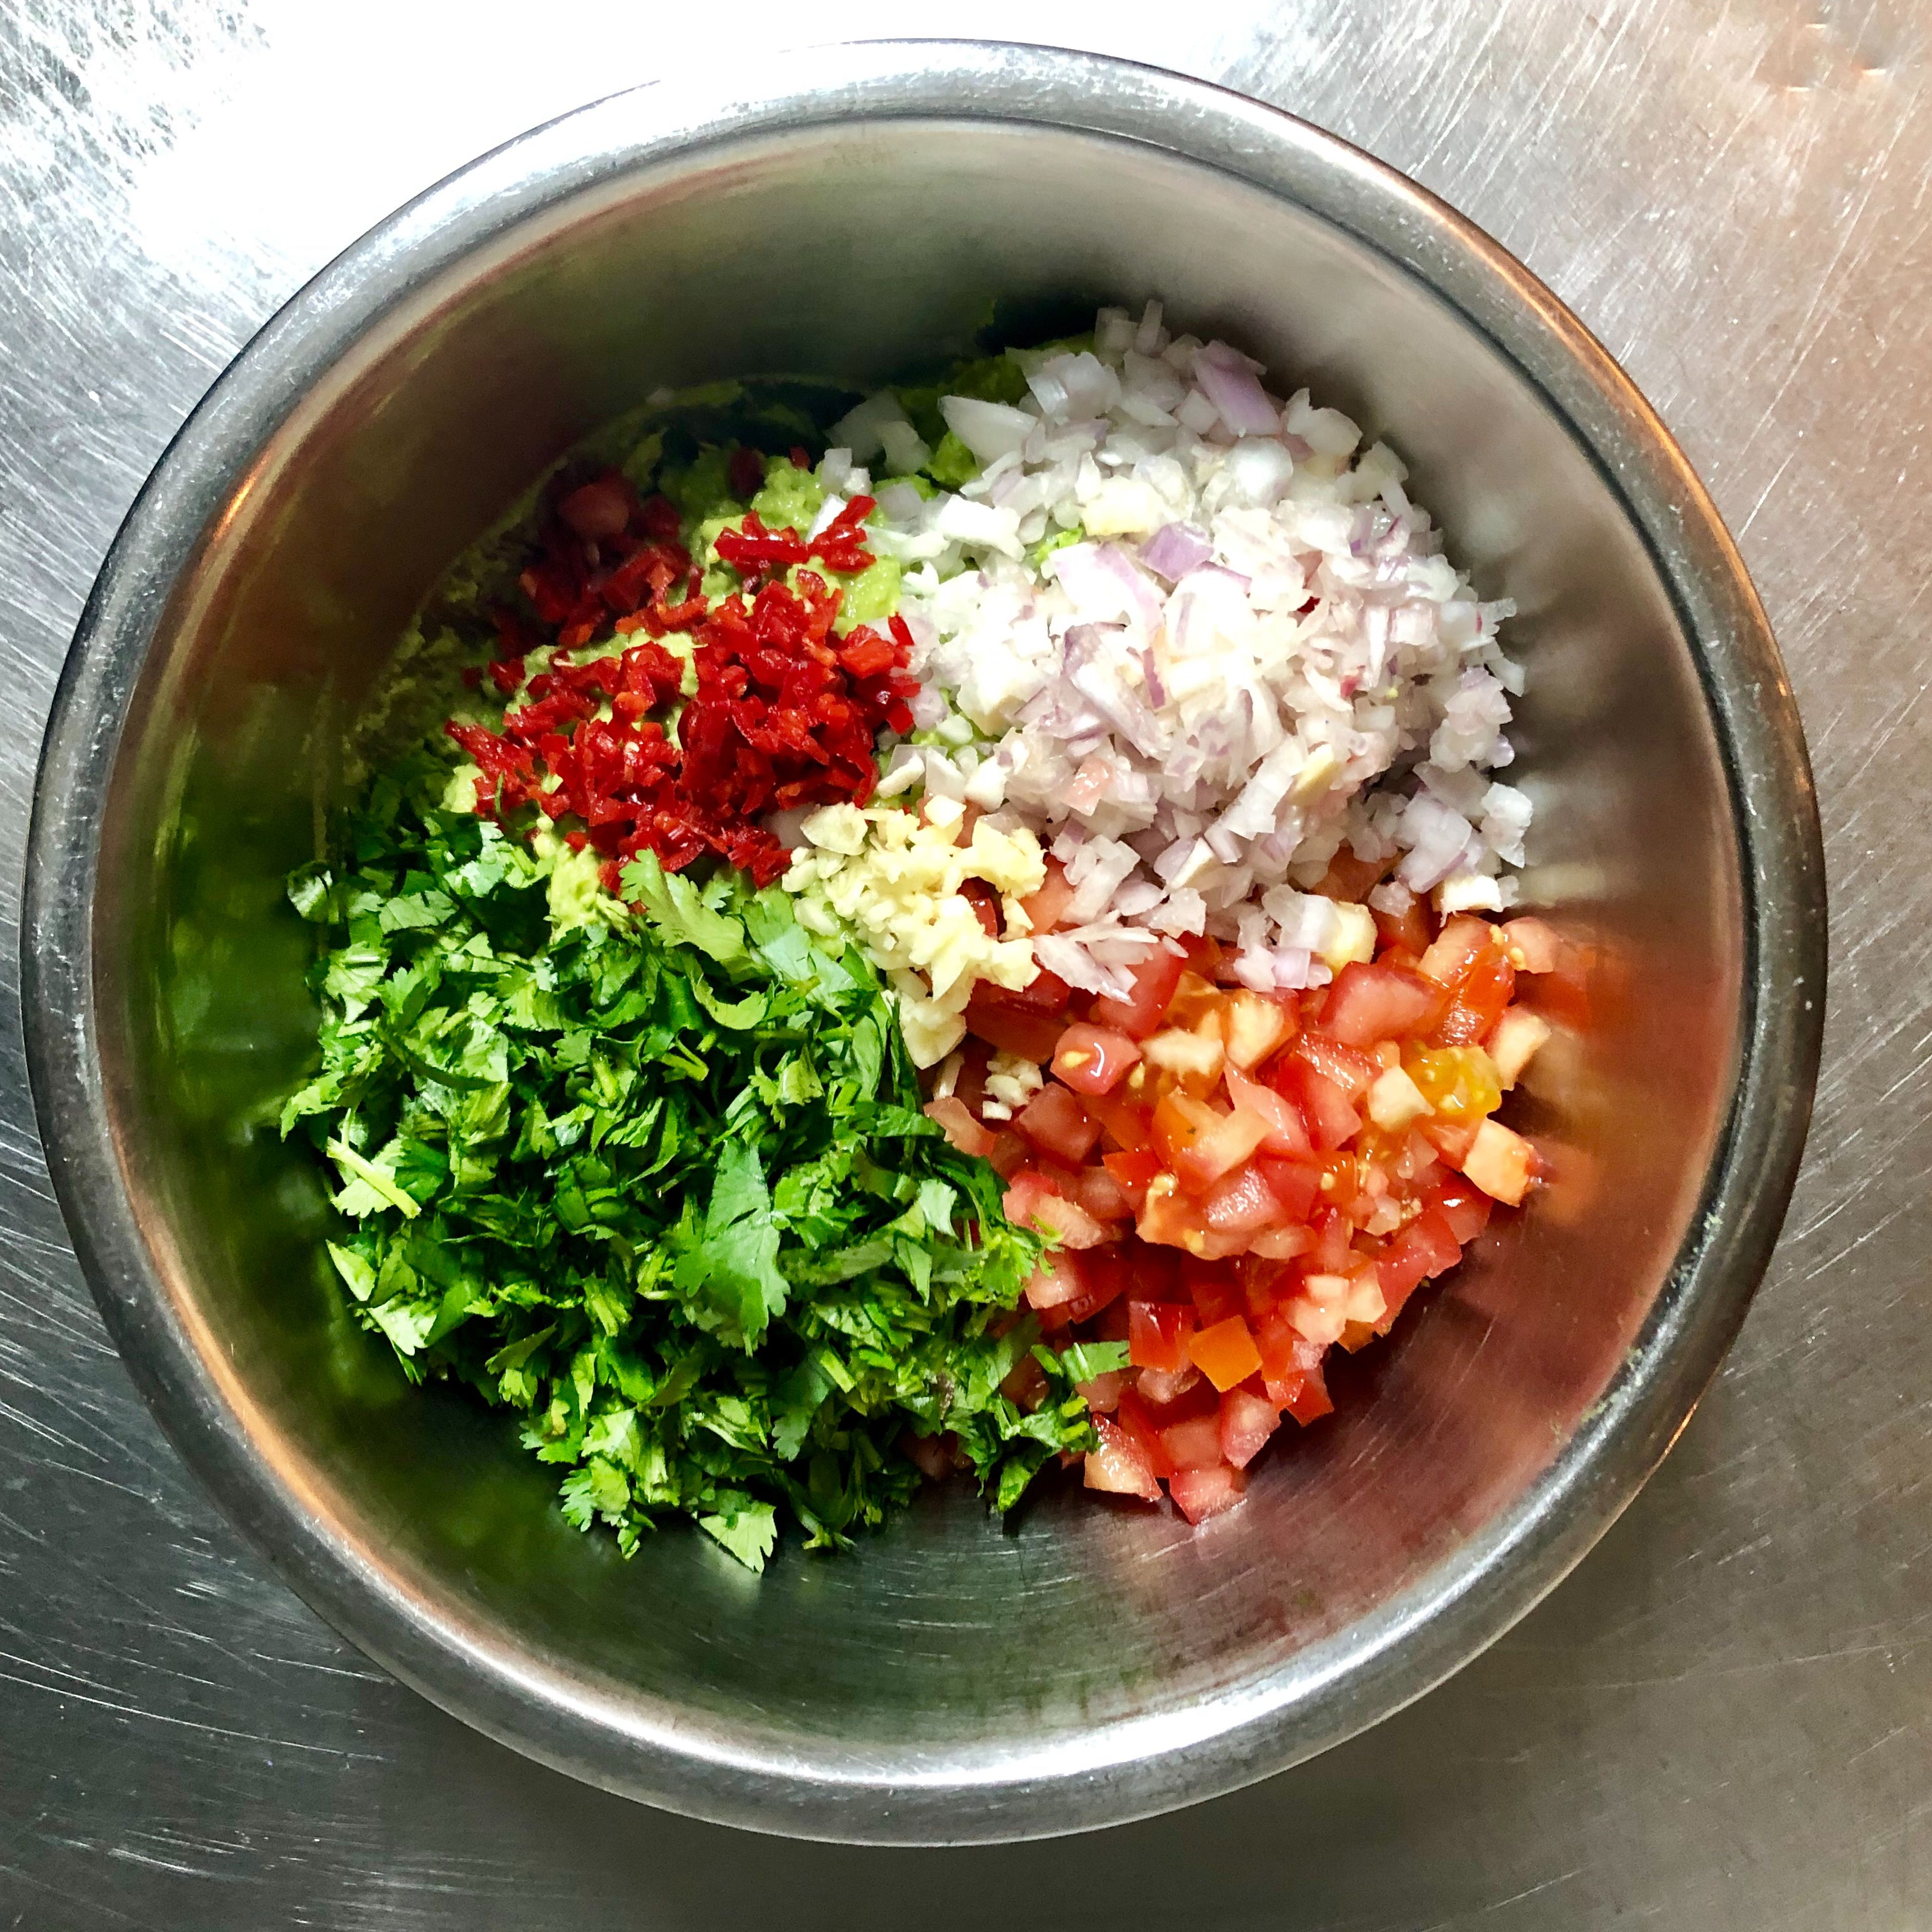 Fold in the tomatos, shallot, garlic, coriander and chili pepper. Mix everything together and let guacamole rest for 30 minutes before serving so the flavors can meld.